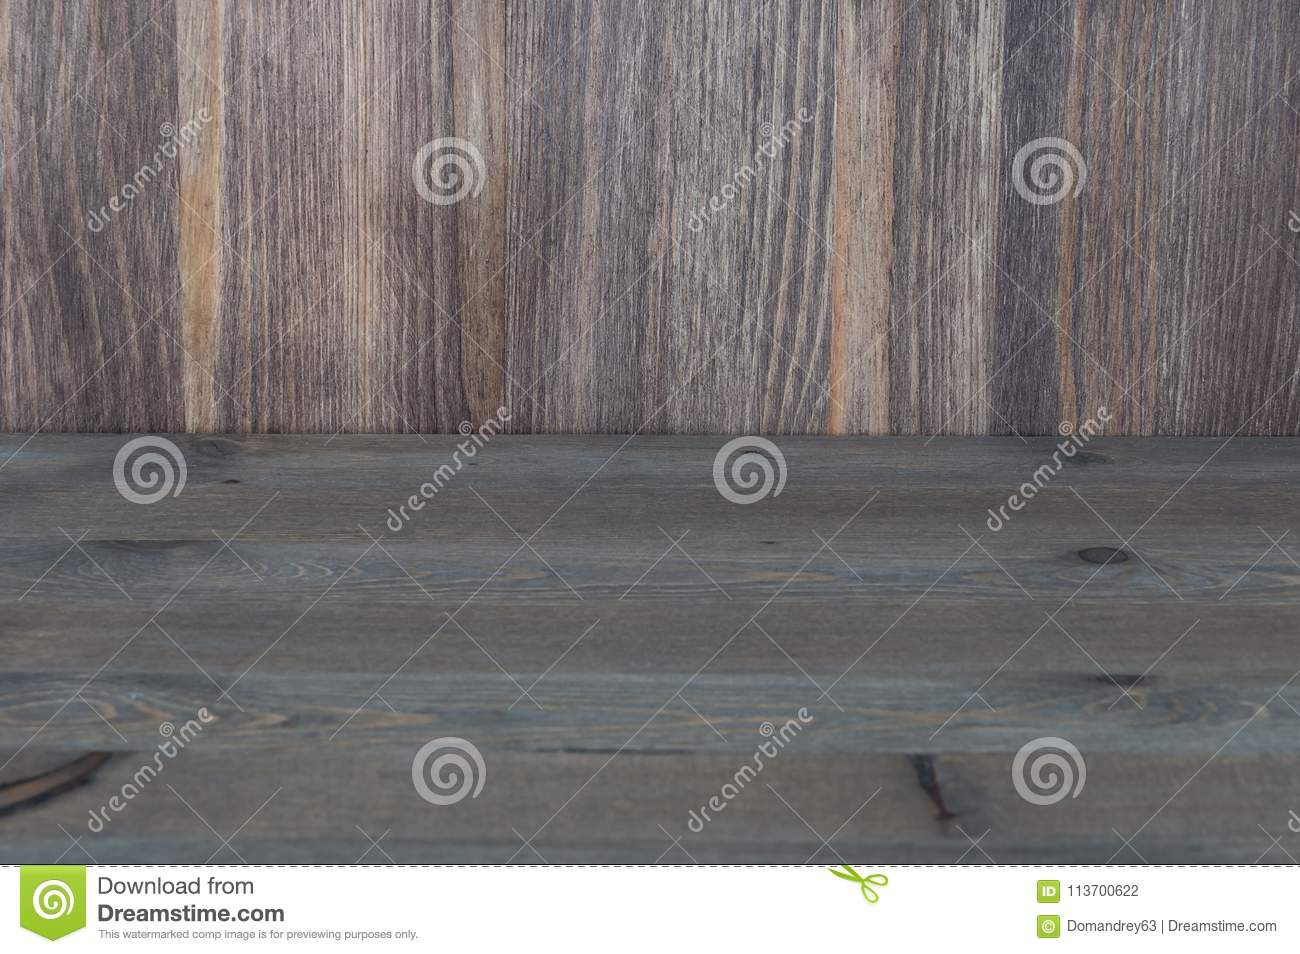 20 Trendy Can You Use Different Color Hardwood Floors 2024 free download can you use different color hardwood floors of background of texture boards of different colors located vertically pertaining to download background of texture boards of different colors loc